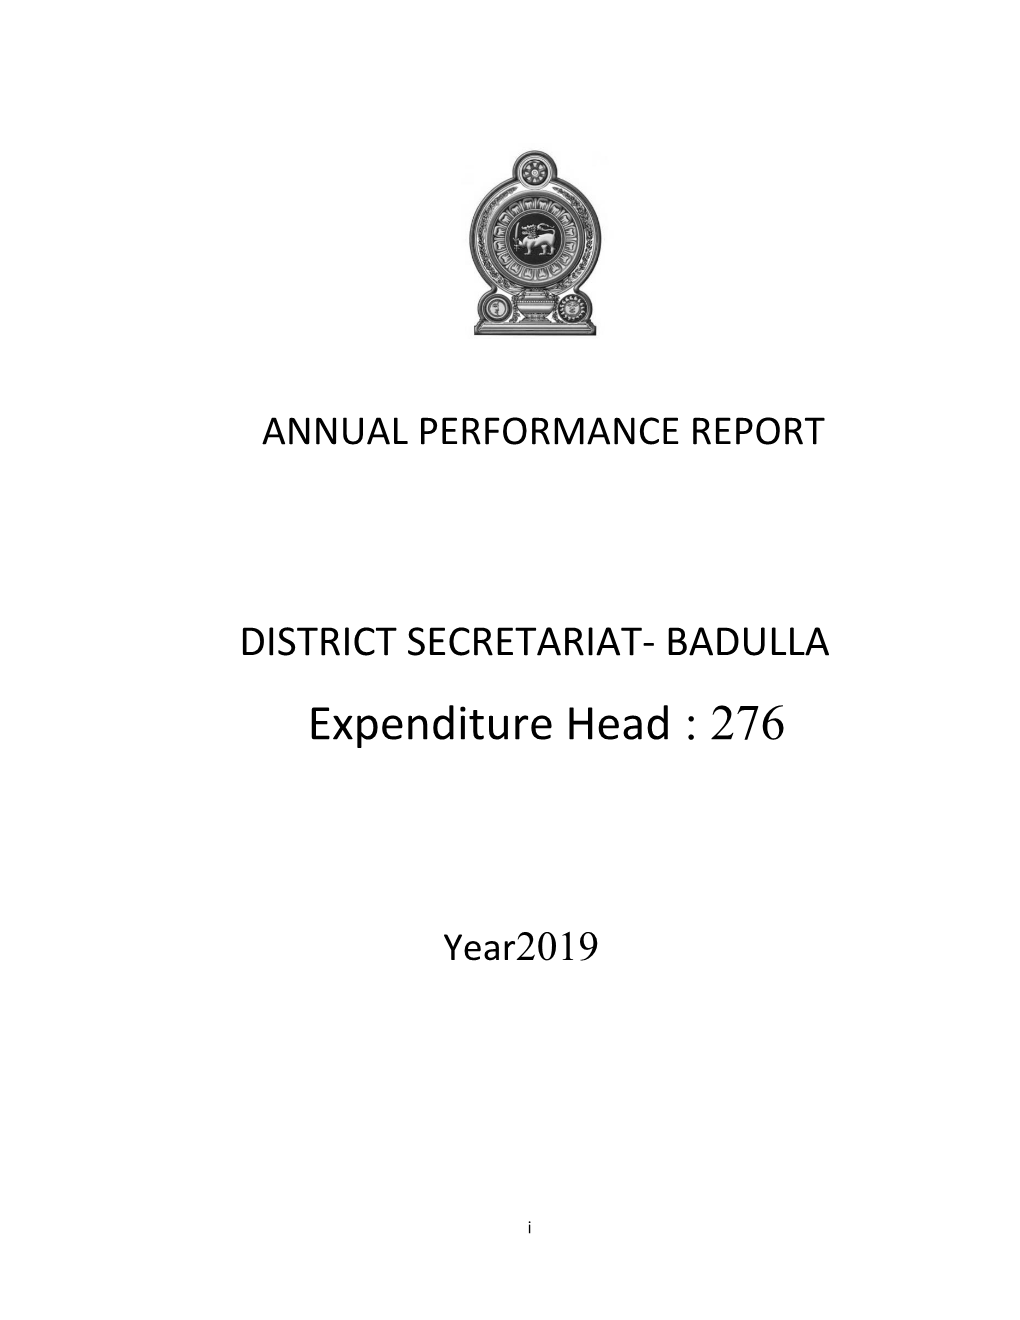 Performance Report & Annual Accounts of the District Secretariat